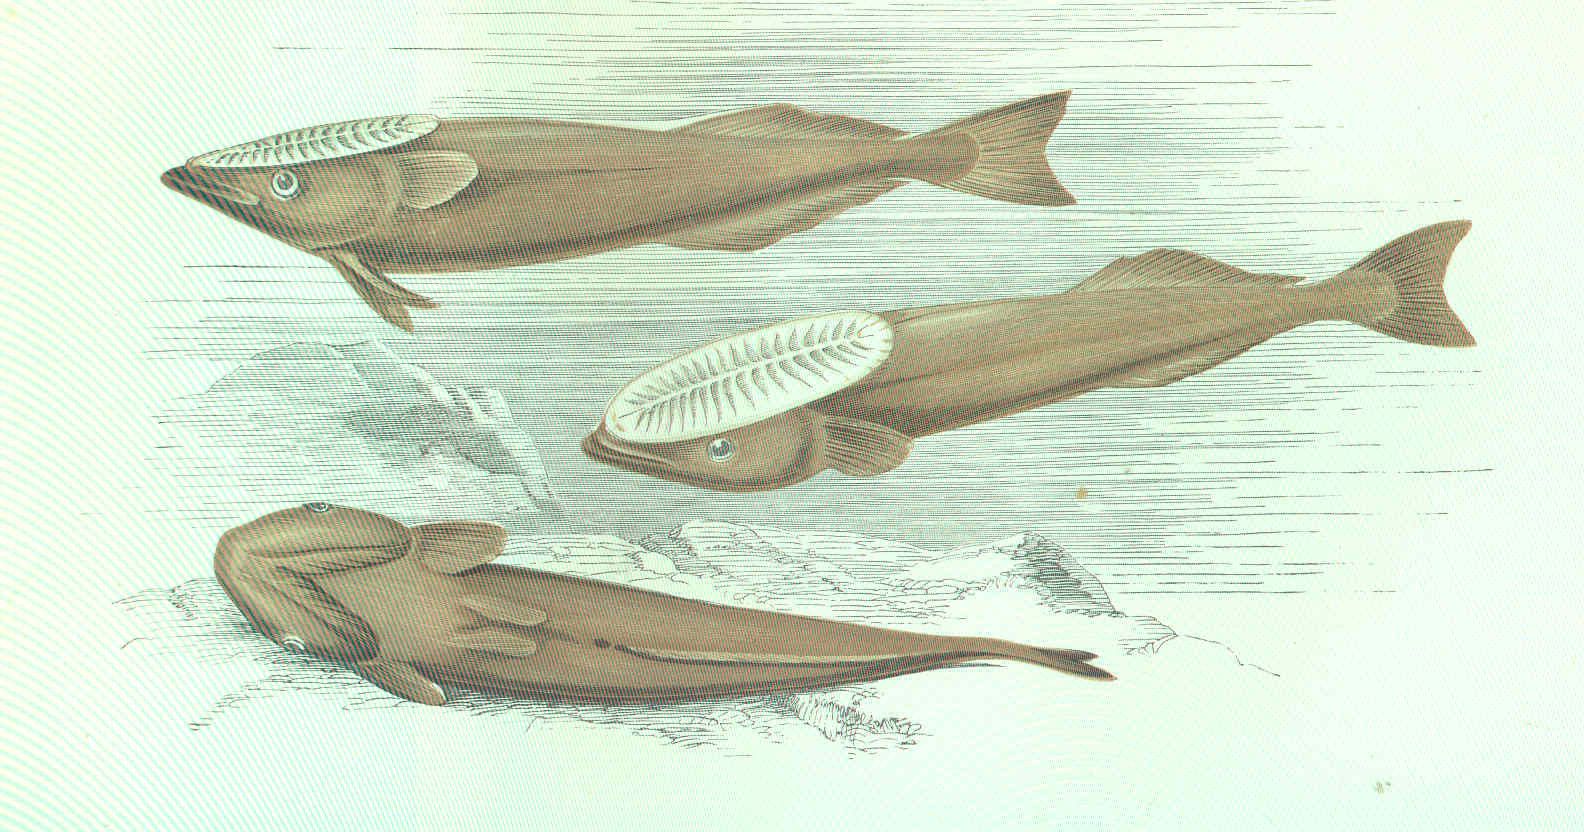 A partly colored illustration of three remora fish which are slender and brown with an oval ridged suction cup on their heads.